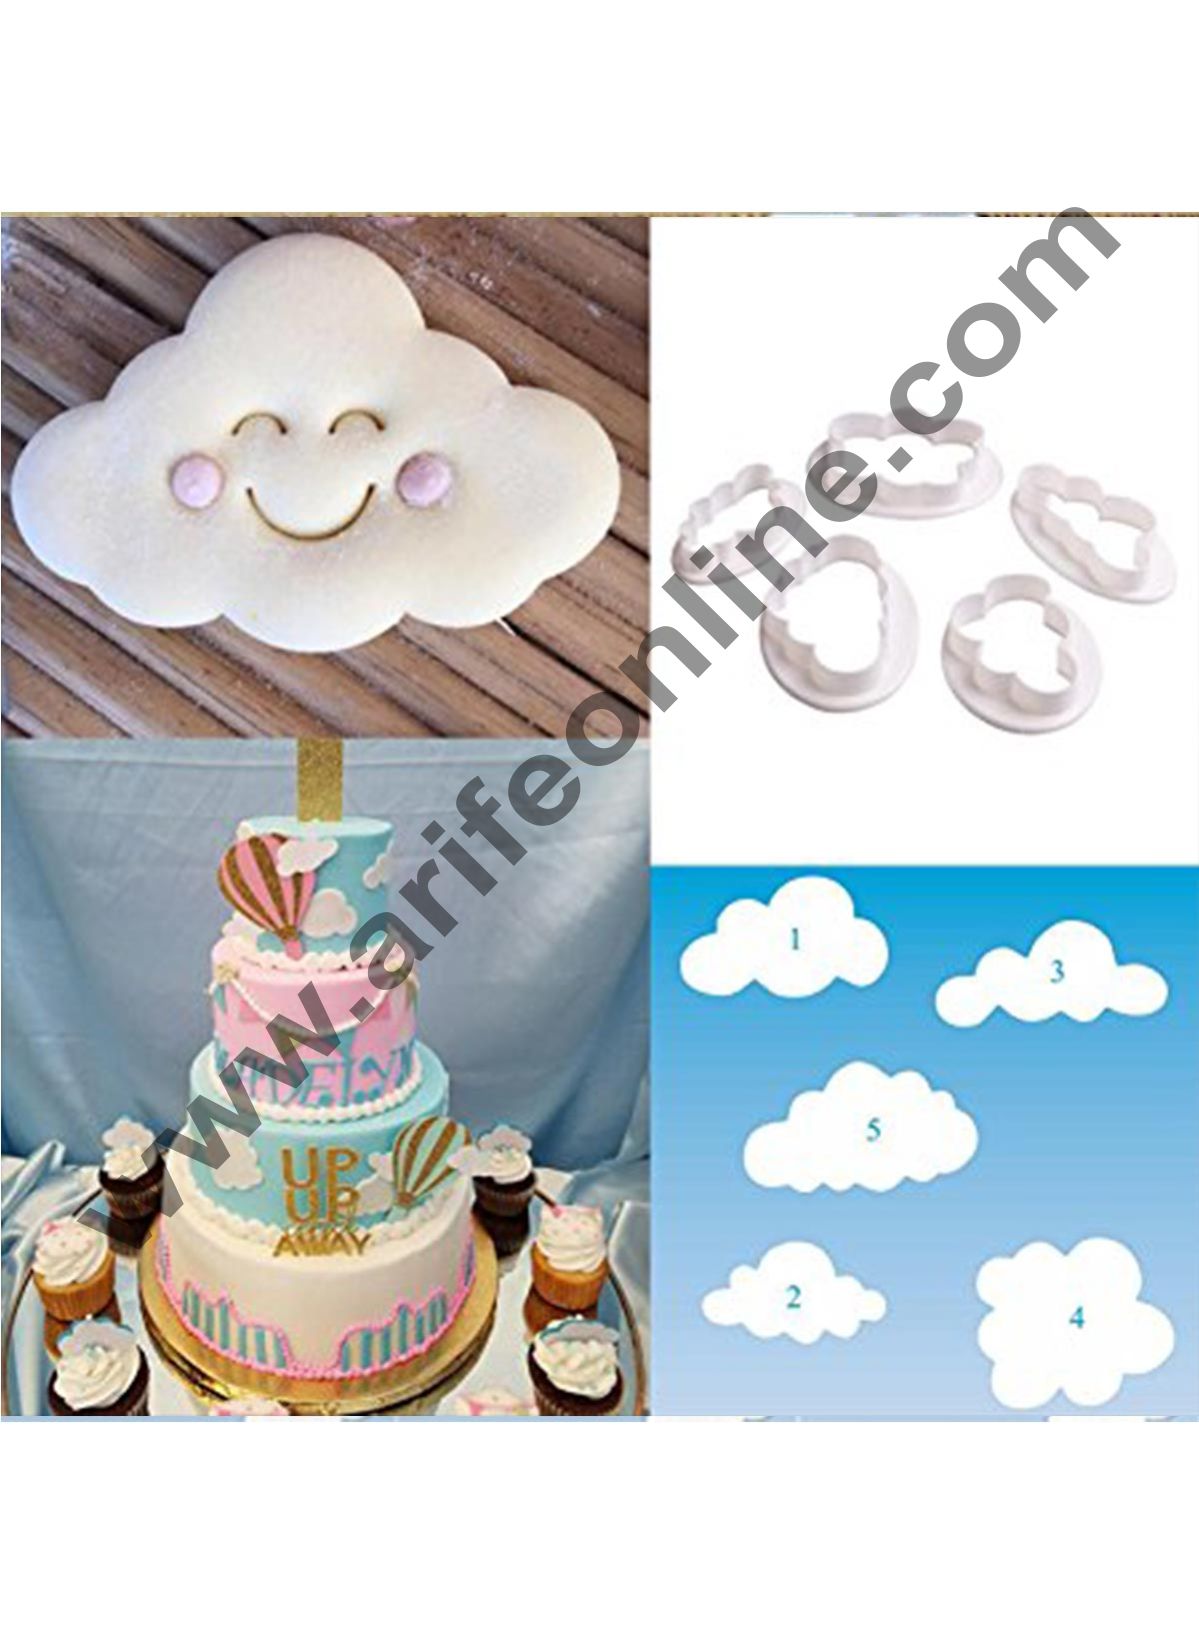 How to Decorate a Cake With Cookie Cutters - littlelifeofmine.com